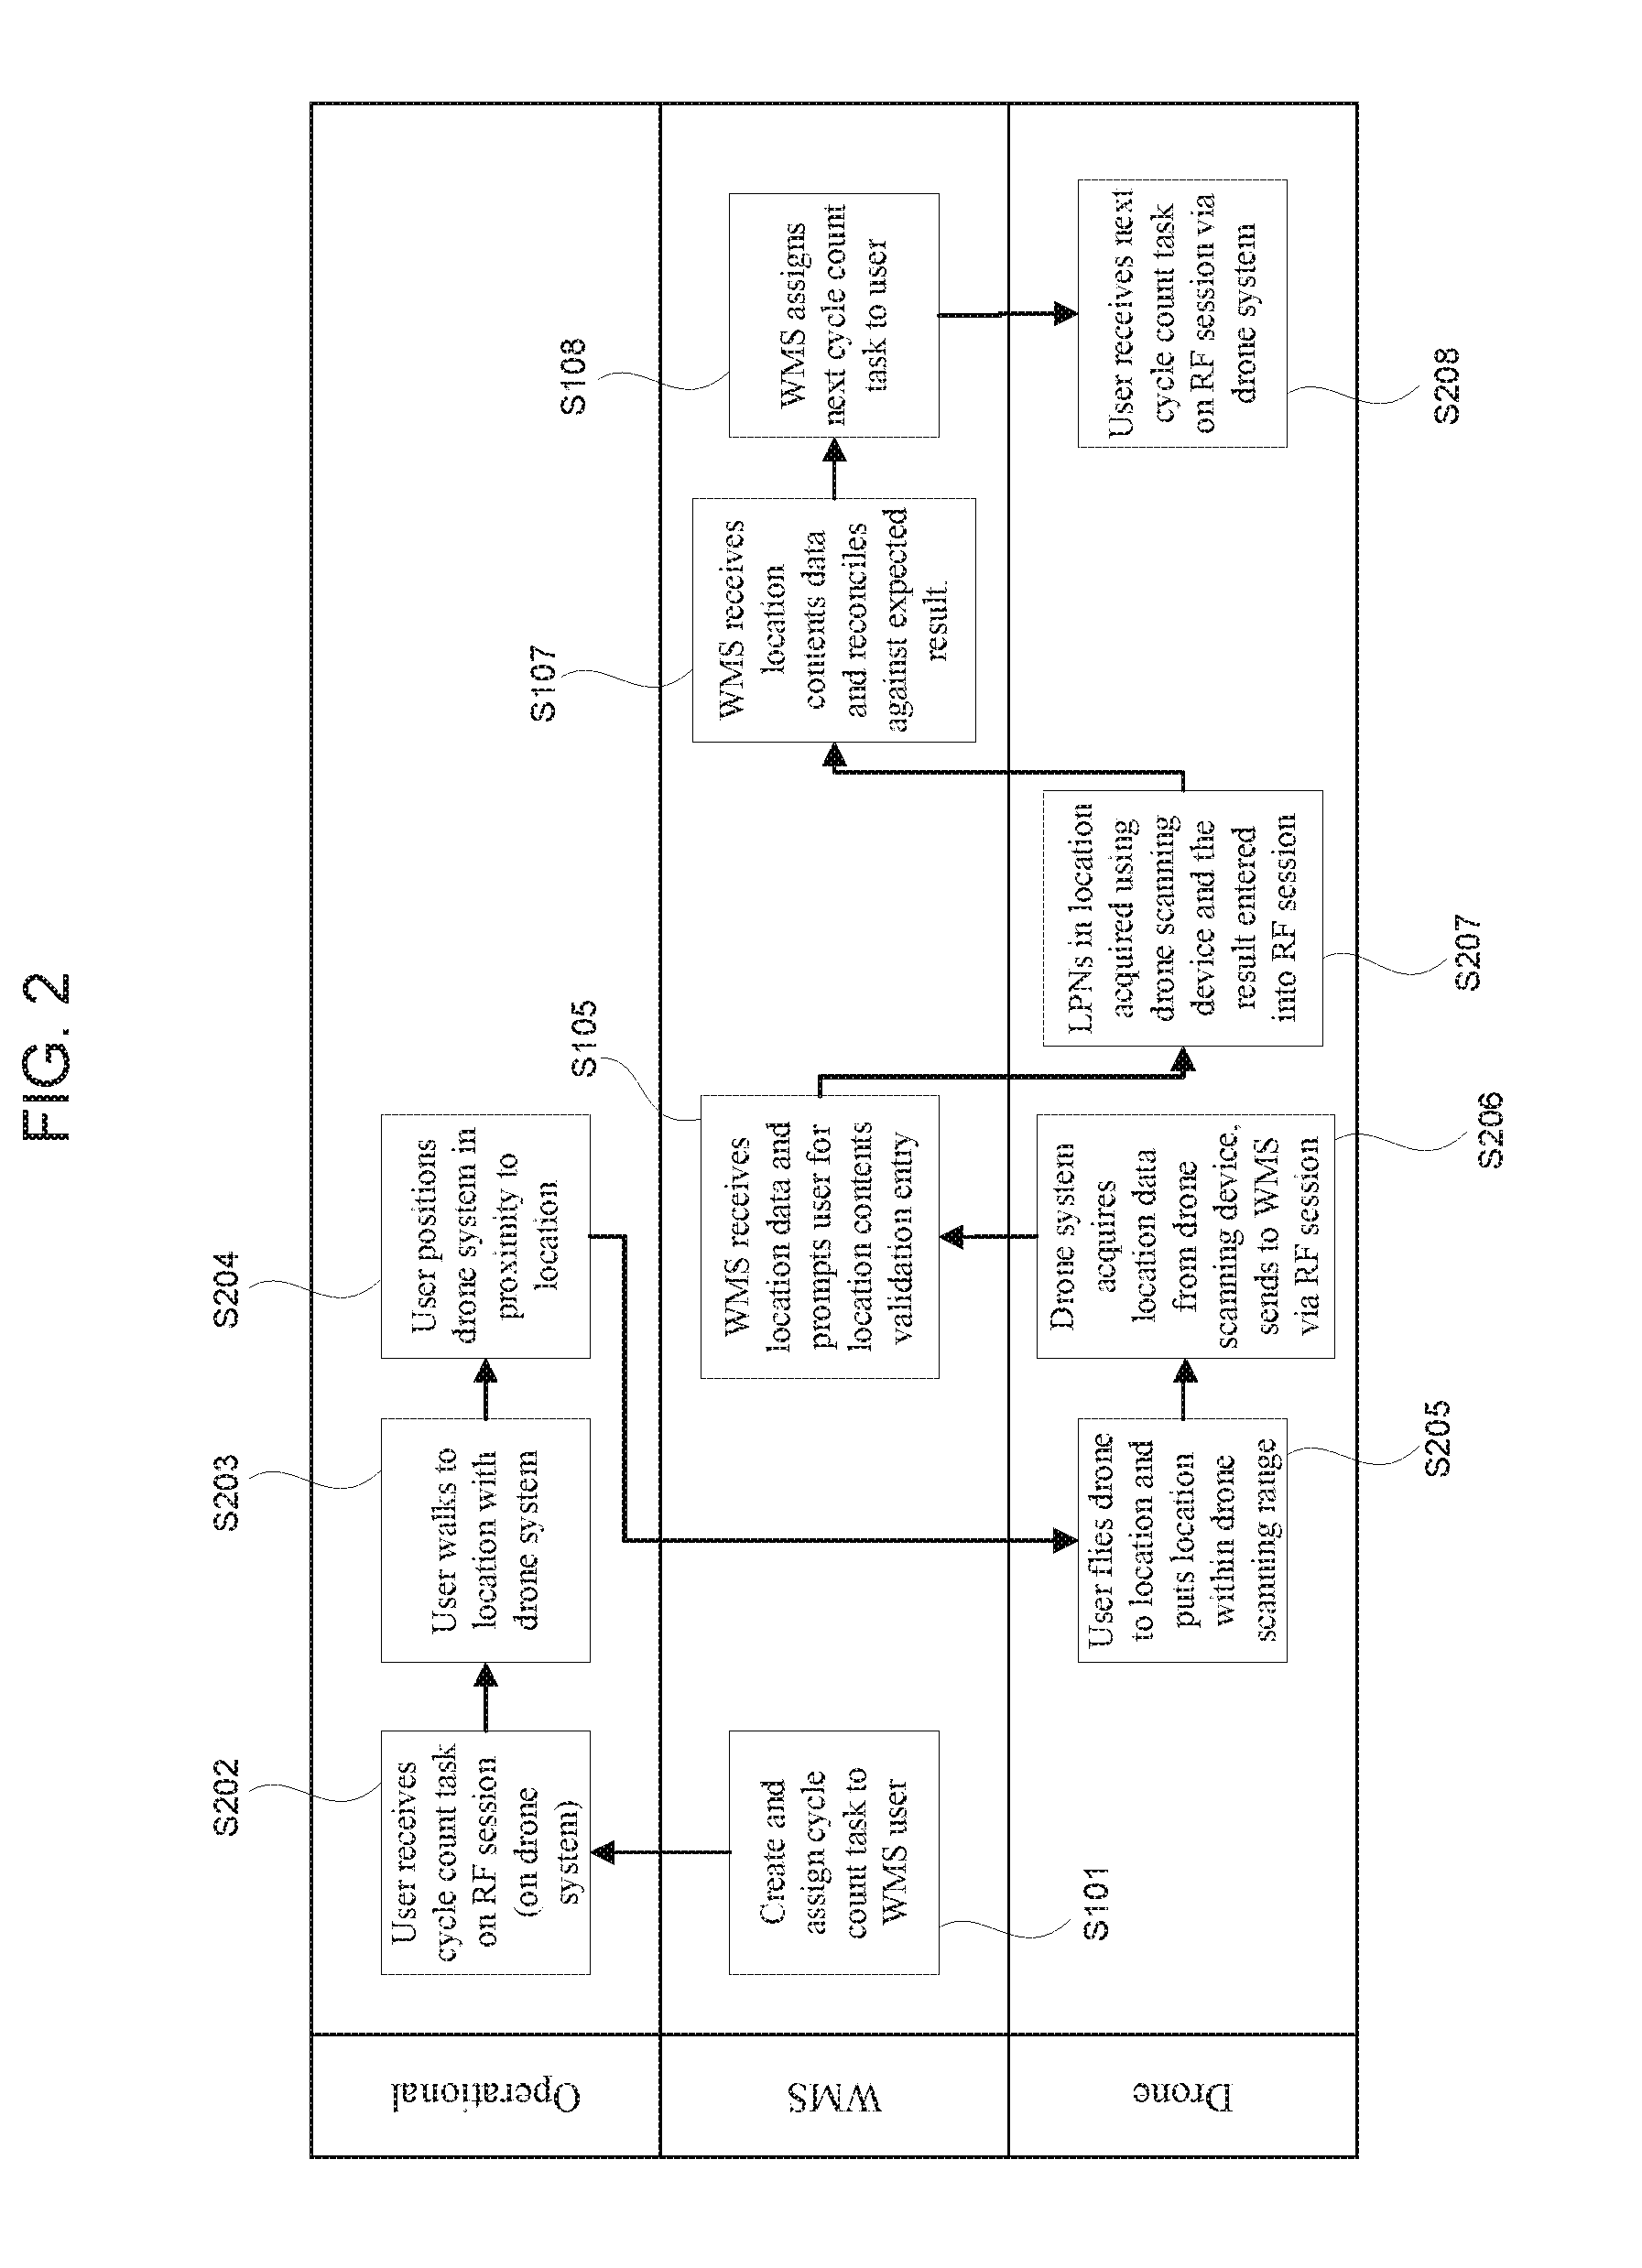 Method and apparatus for warehouse cycle counting using a drone